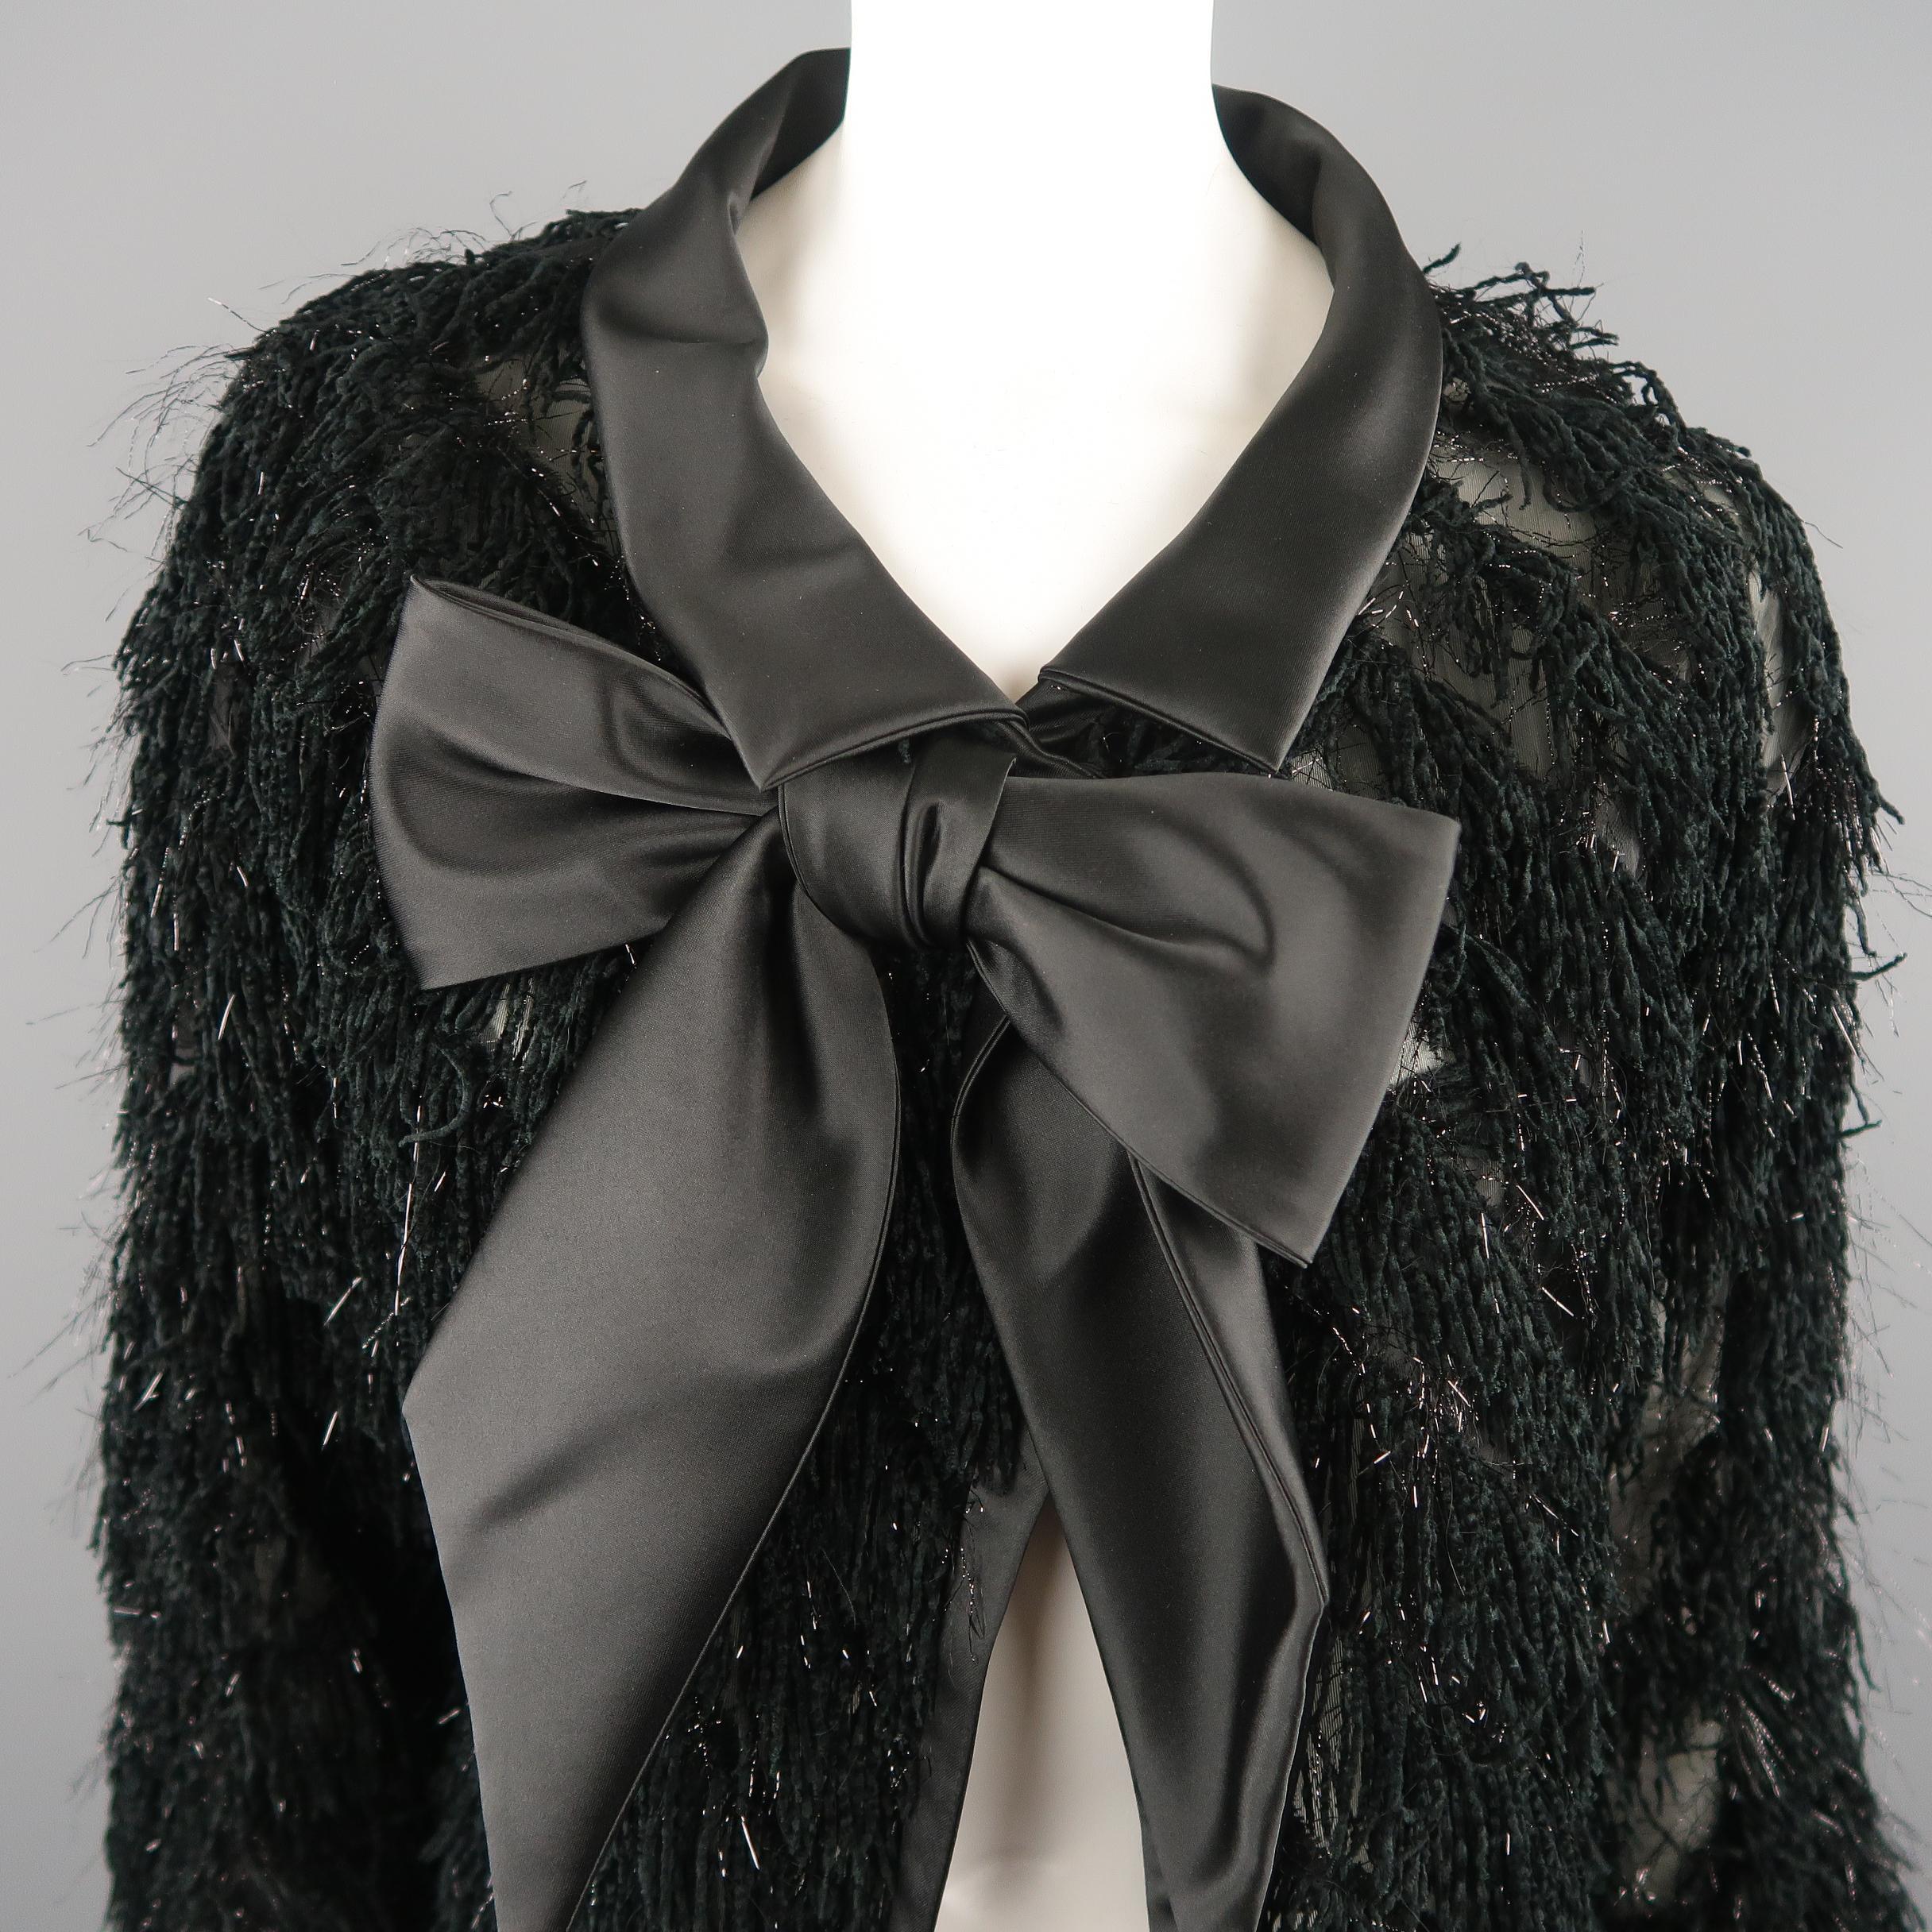 GIORGIO ARMANI evening jacket comes in a sheer material with all over diagonal fringe with a sing snap closure, pointed satin collar with bow, cropped sleeves. Made in Italy.
 
Excellent Pre-Owned Condition.
Marked: (no size)
 
Measurements:
